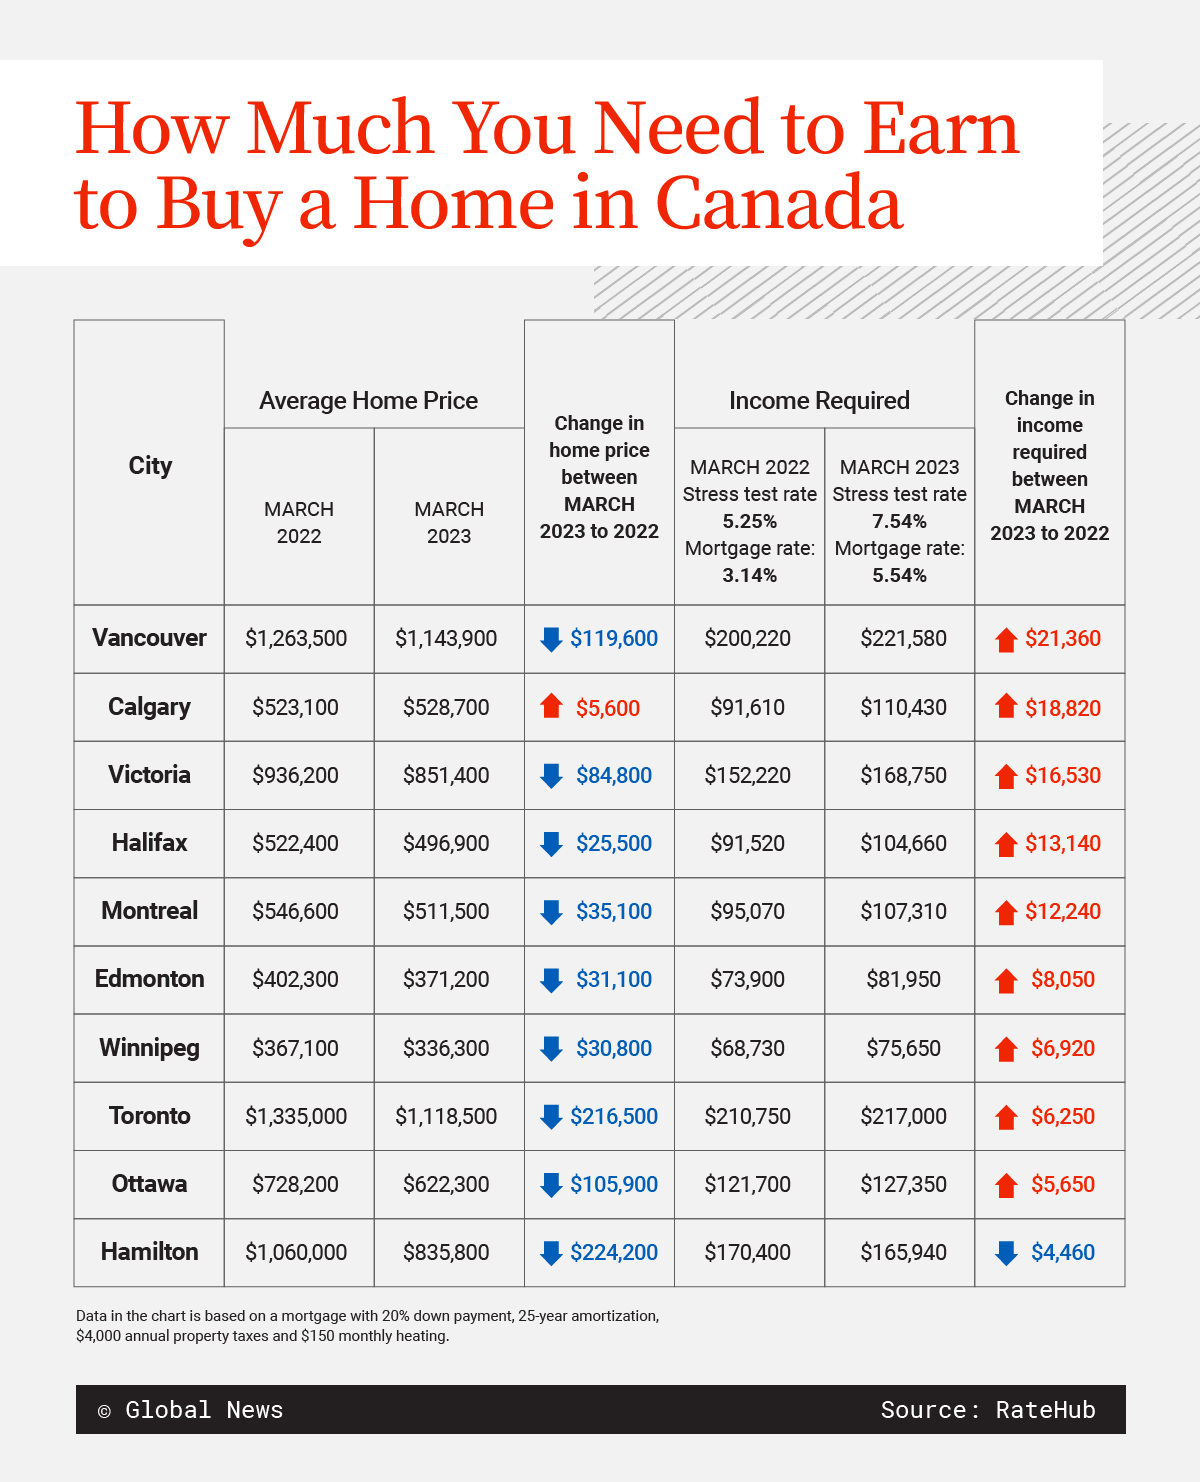 How Much Should Canadians Spend on Rent?